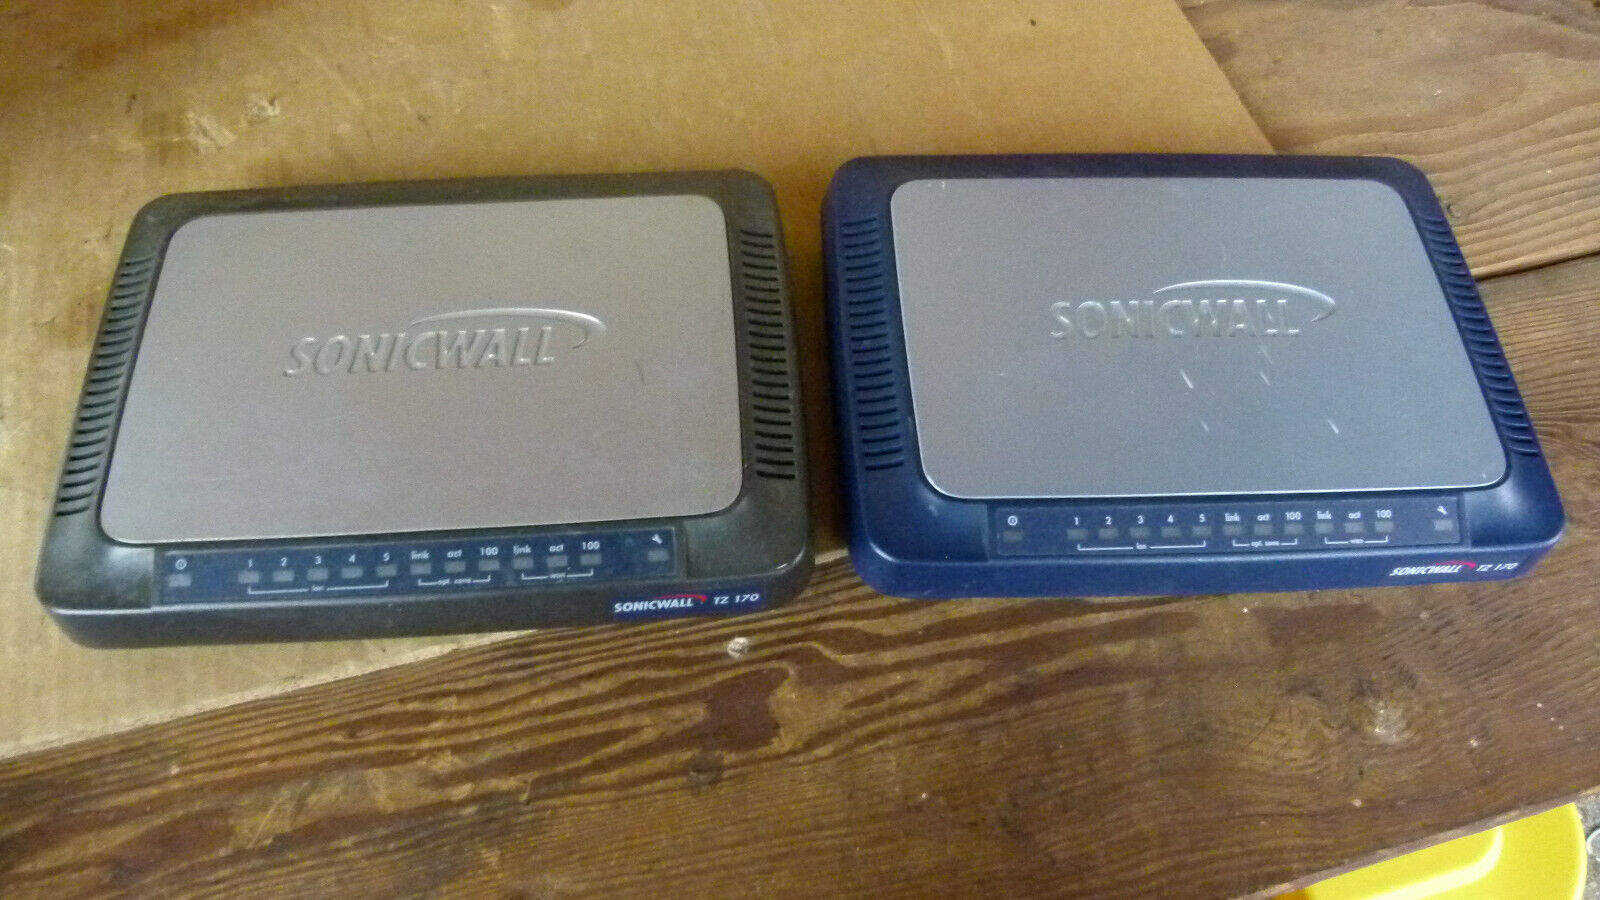 Lot of 2 - Sonicwall TZ 170 10 Node APL11-029 5-Port Router with AC Adapter